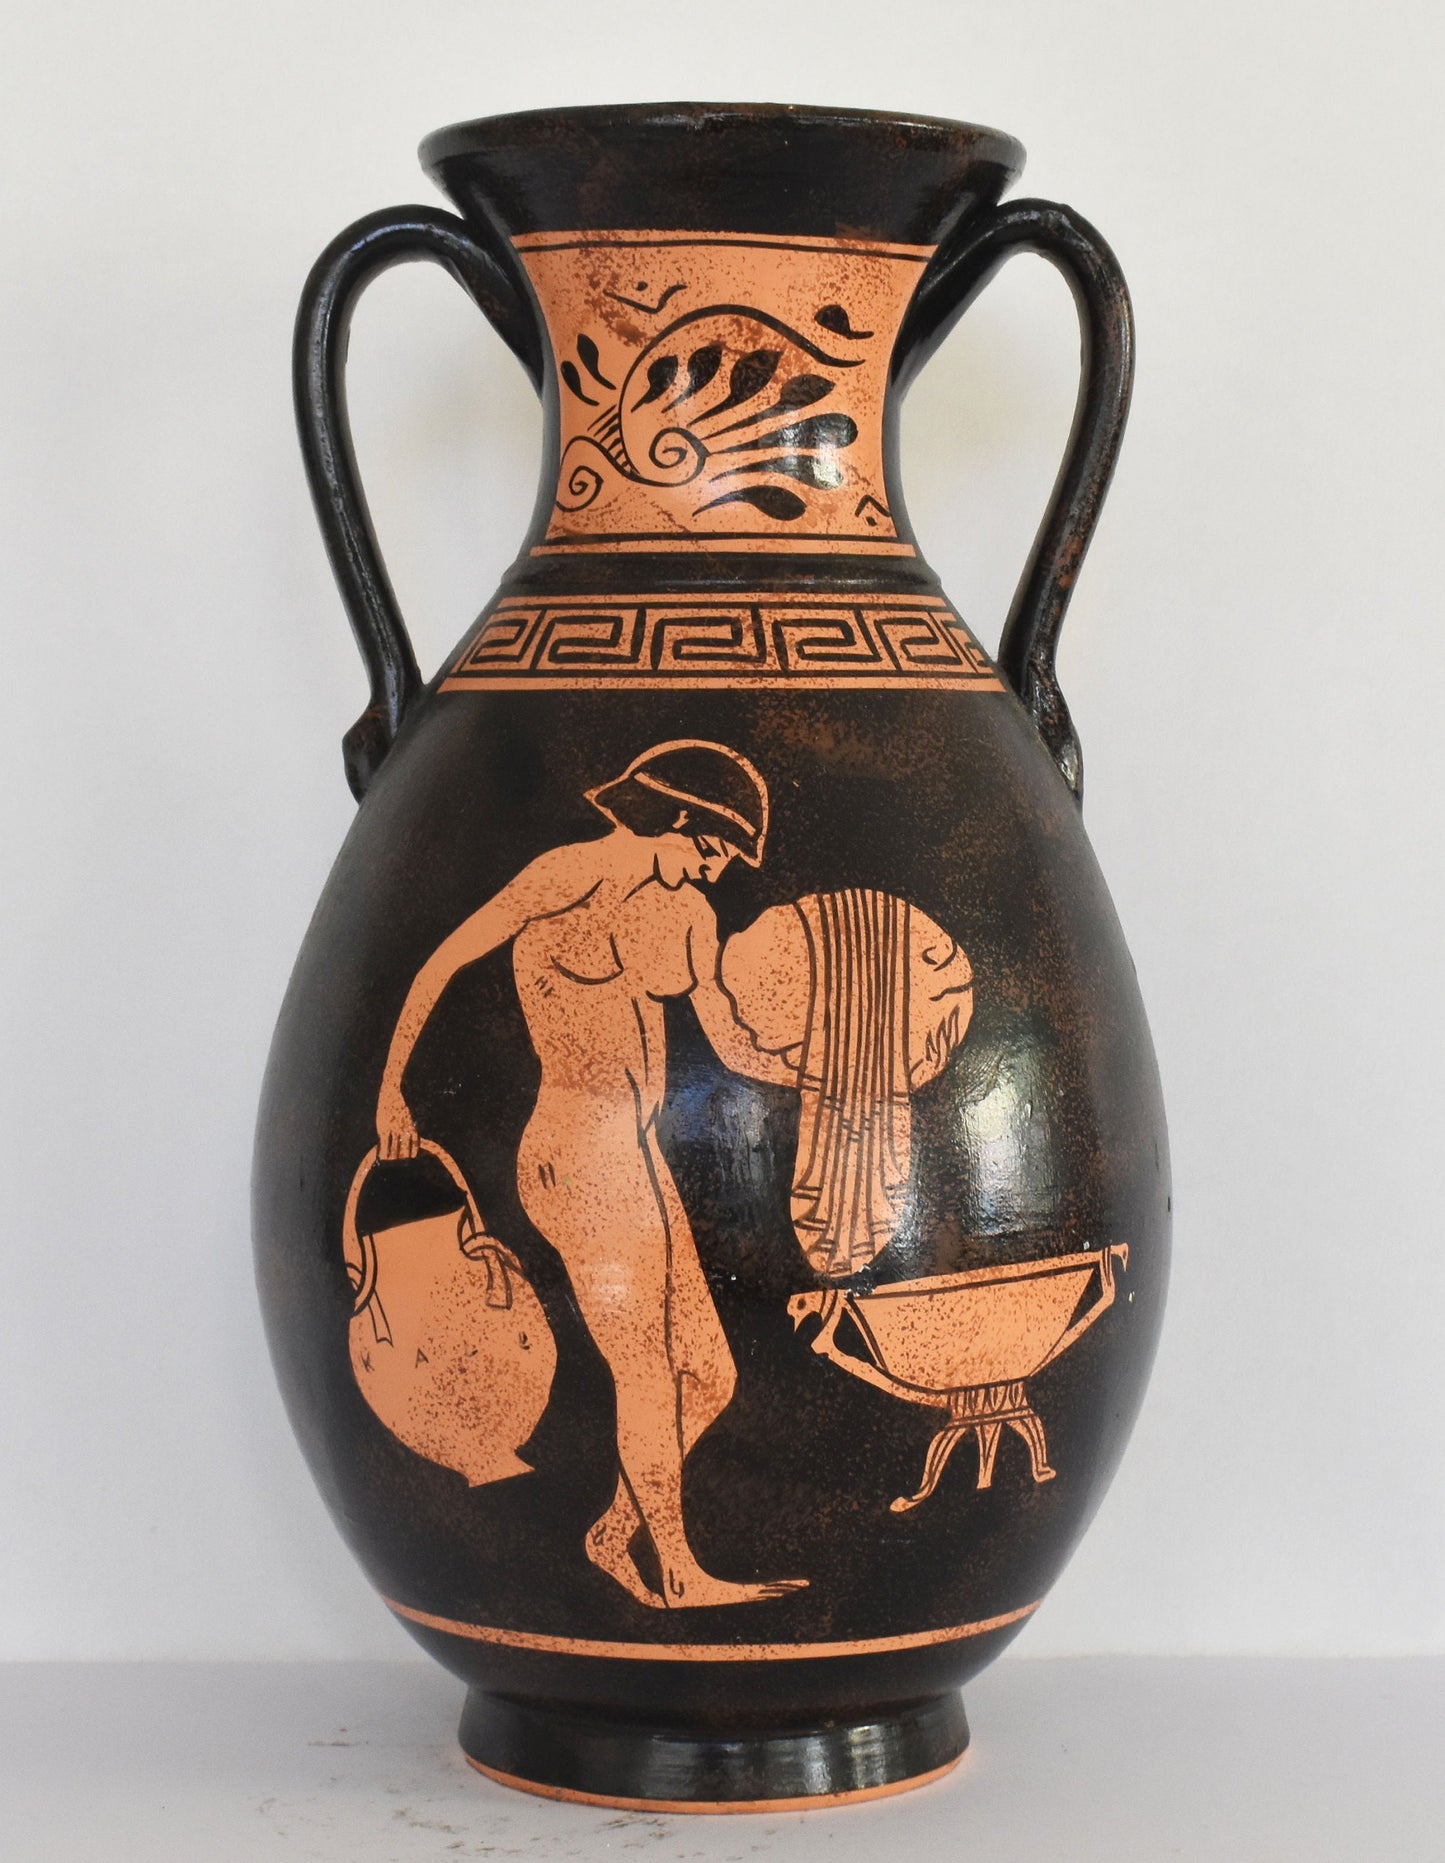 Athena's and Poseidon's Dispute - Young Man taking his Bath - Meander and Floral Design - Ceramic Vase